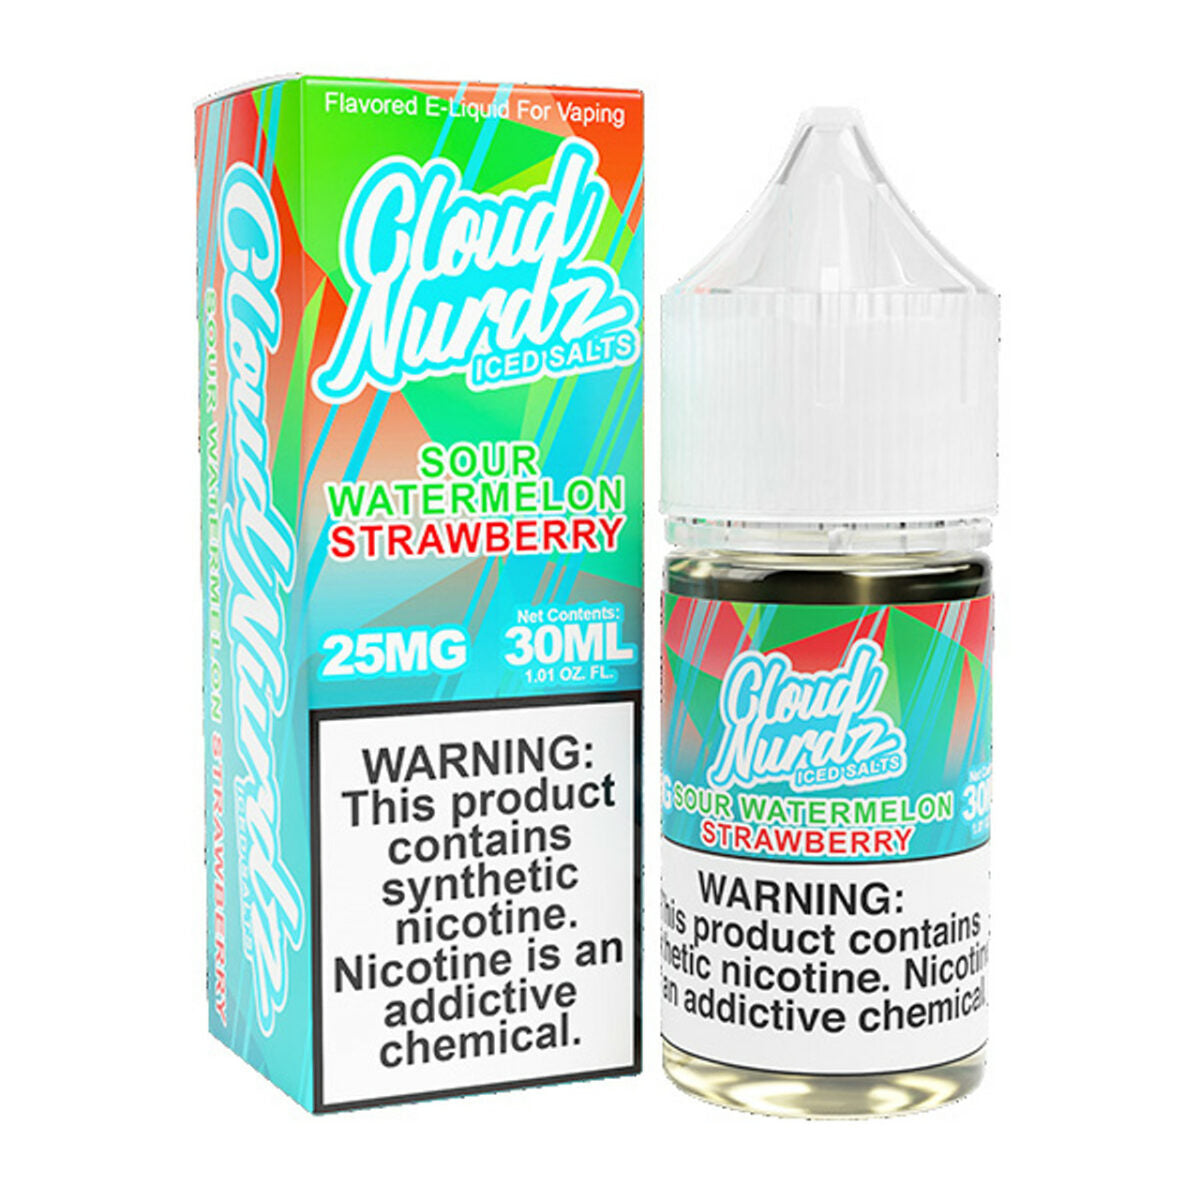 Sour Watermelon Strawberry Iced by Cloud Nurdz Salts Series 30mL  with Packaging